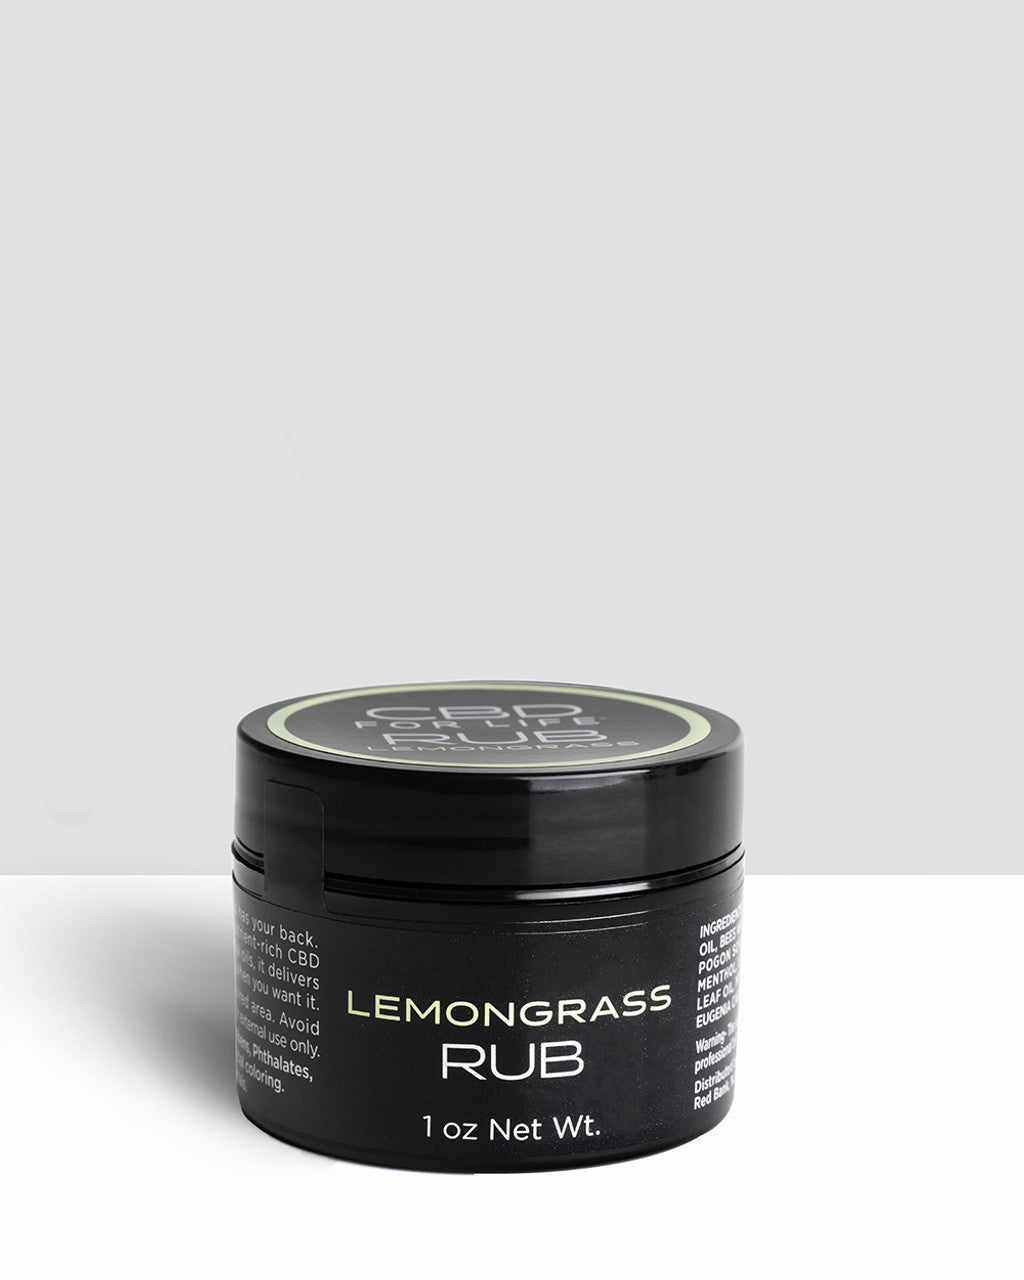 This best-selling CBD rub helps to soothe discomfort so you can keep moving. Powered by phytonutrient-rich CBD and powerful essential oils, the balmy texture of our CBD rub absorbs into the skin, delivering the results you want when you want it.